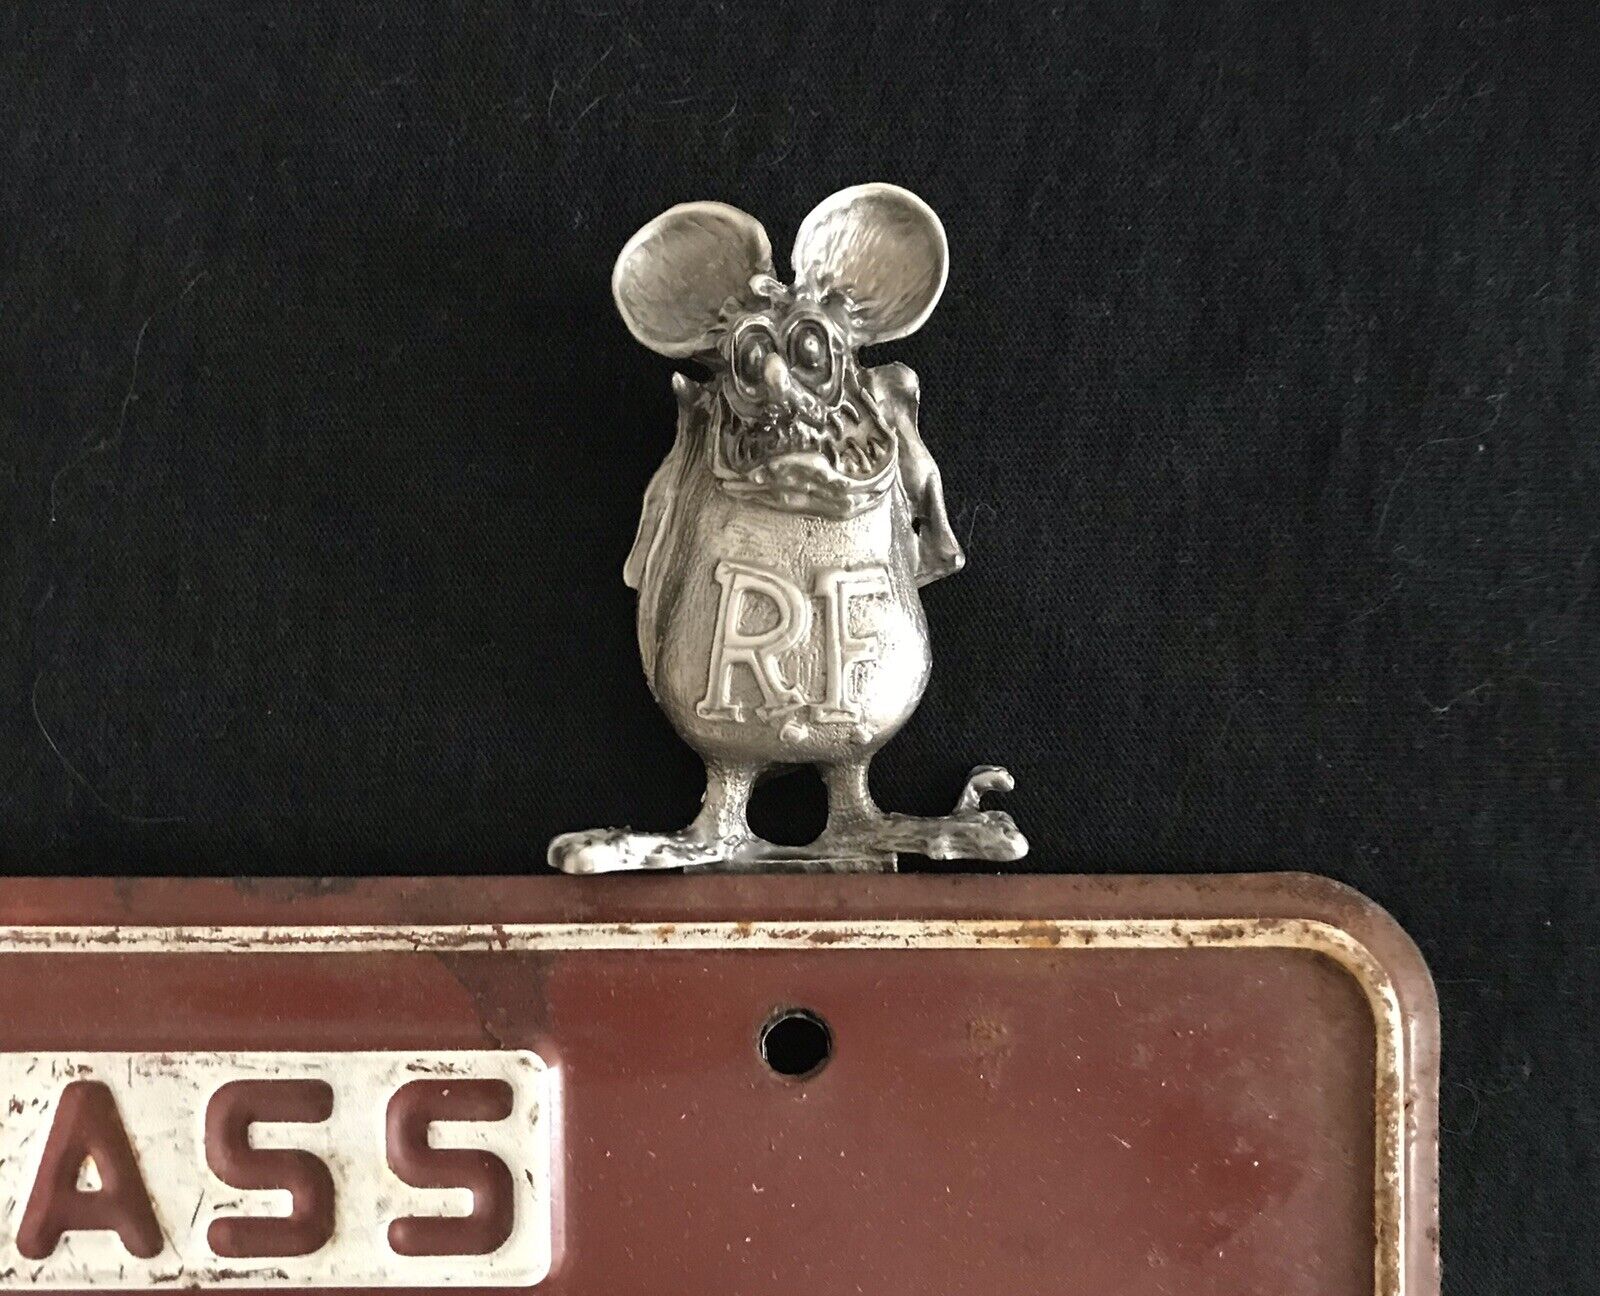 Big Daddy Roth Rat Fink Hot Rod Solid Metal  License Plate Topper